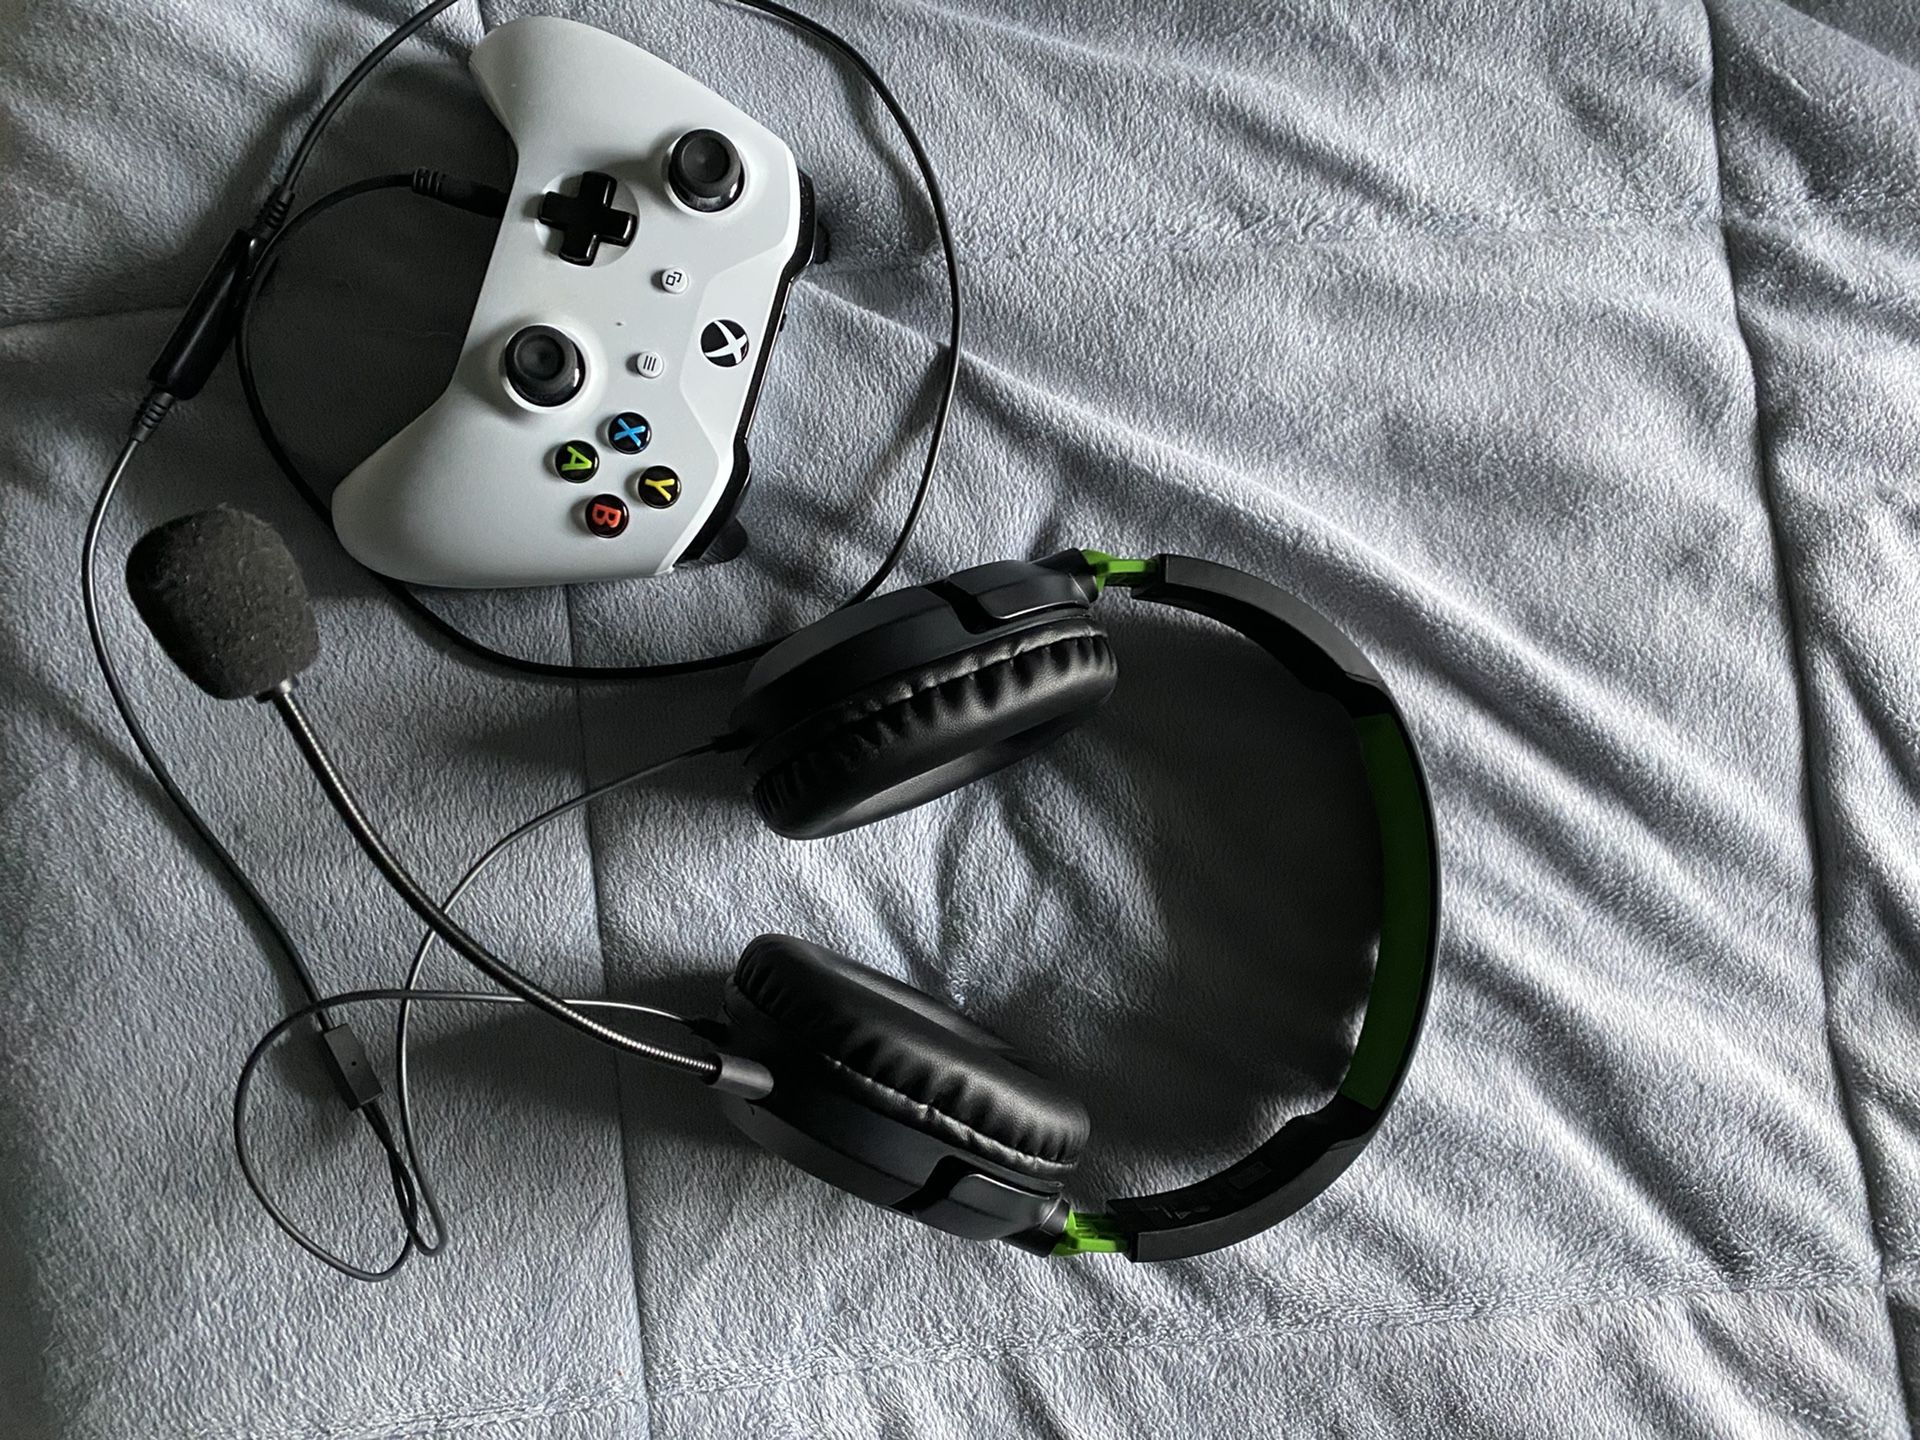 Xbox one controller and headset